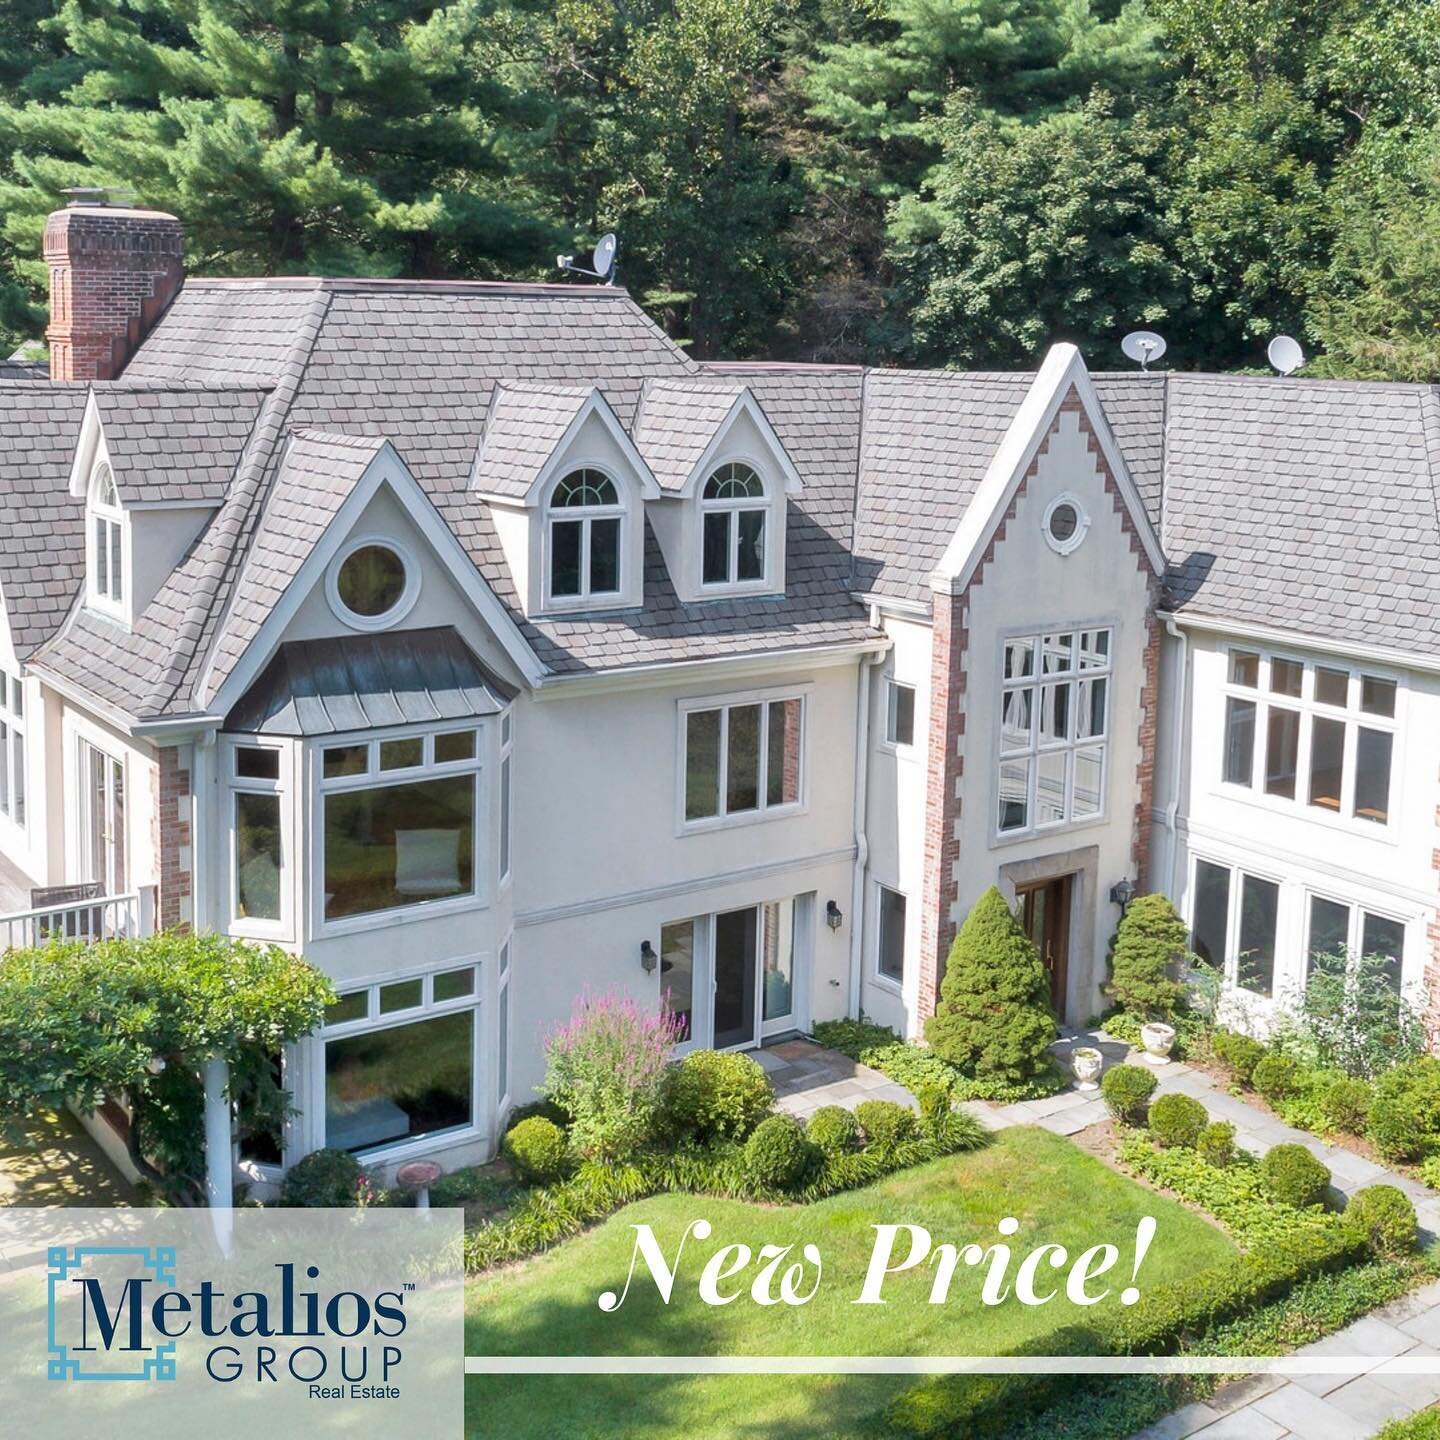 NEW PRICE! 167 Bedford Rd - a truly majestic country estate, including a French manor house and 2 bedroom cottage, all on 5 acres of beautiful land.

Complete with a spa, tennis court, 4 car garage, stunning pool, waterfall, terraces, pergolas, &amp;